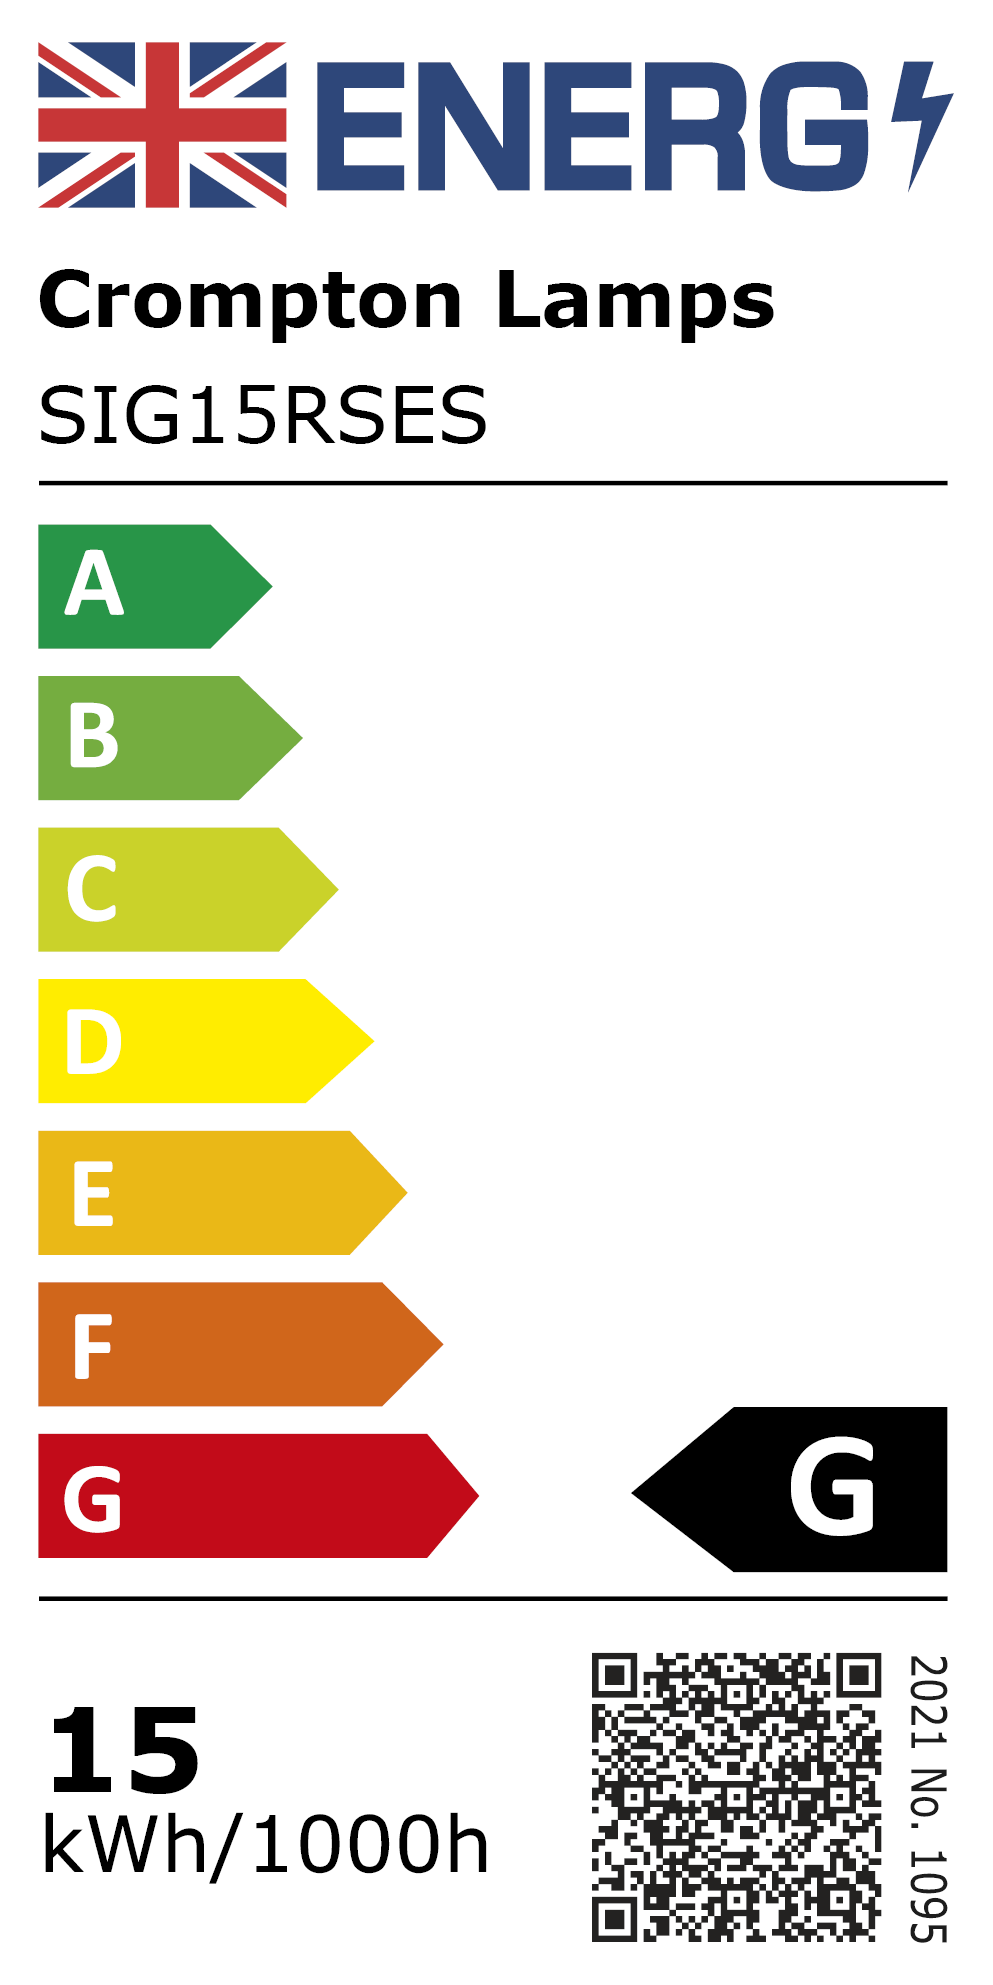 New 2021 Energy Rating Label: Stock Code SIG15RSES